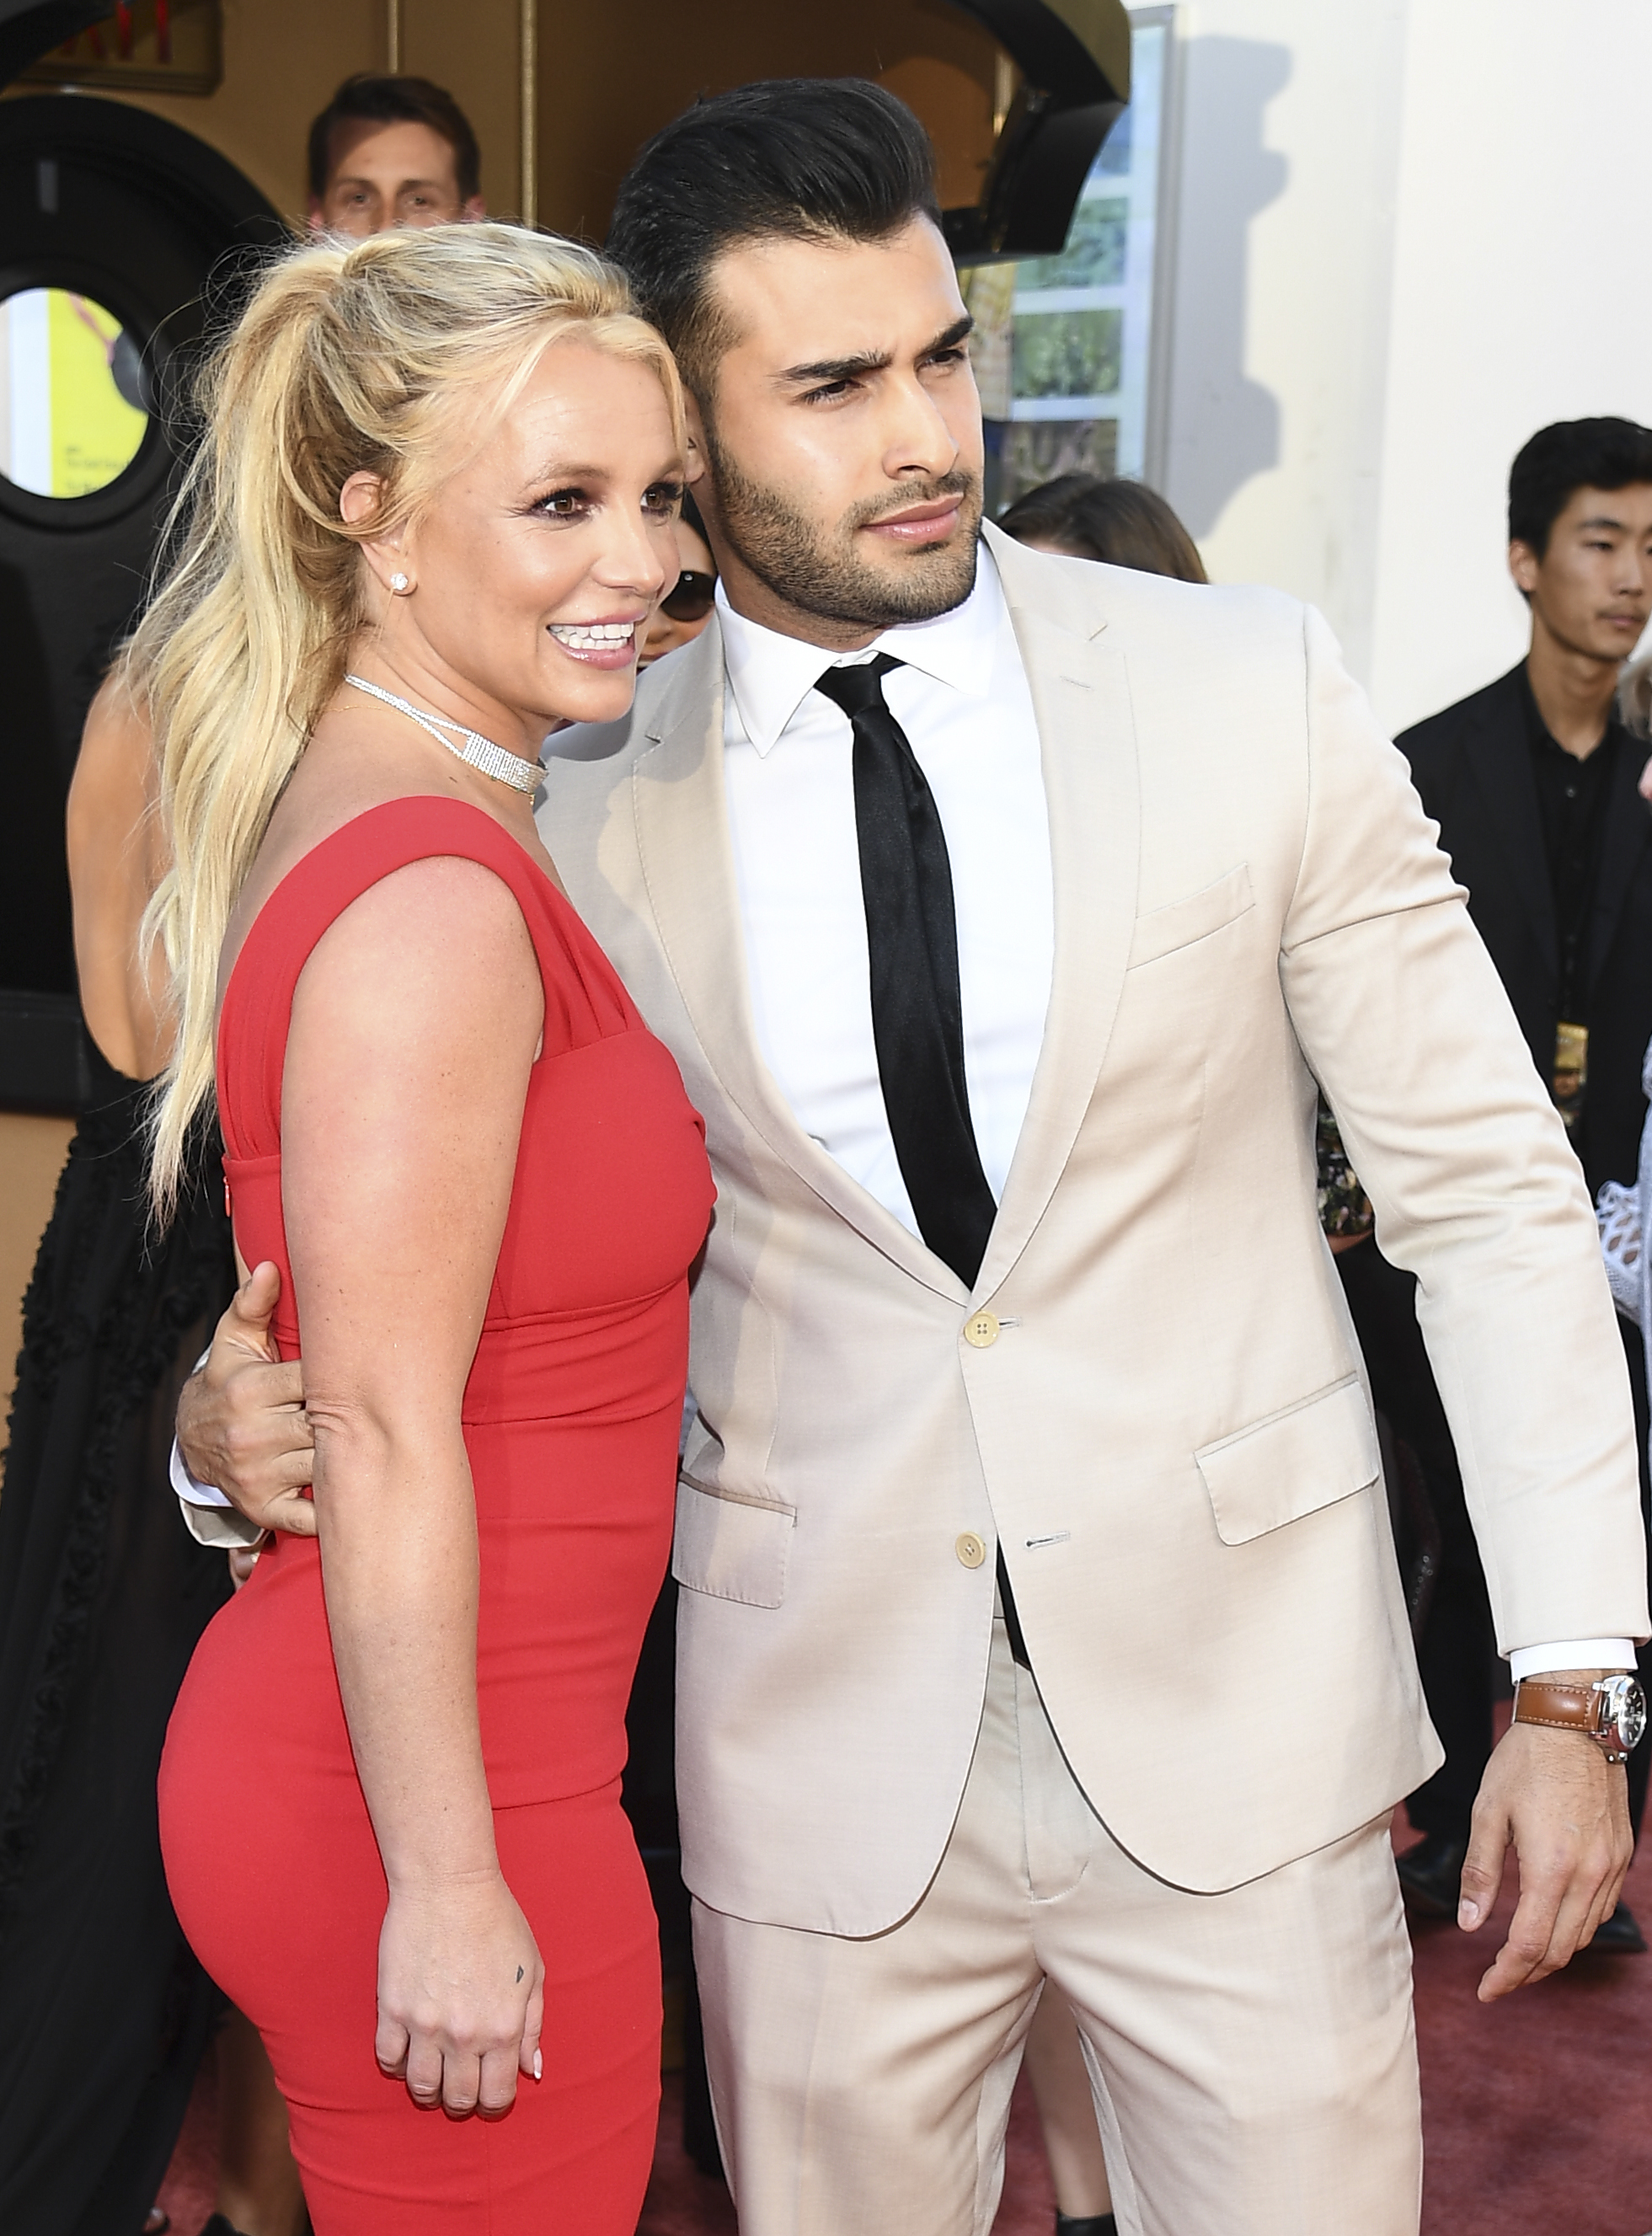 Britney Spears and Sam Asghari in Los Angeles on July 22, 2019 | Source: Getty Images